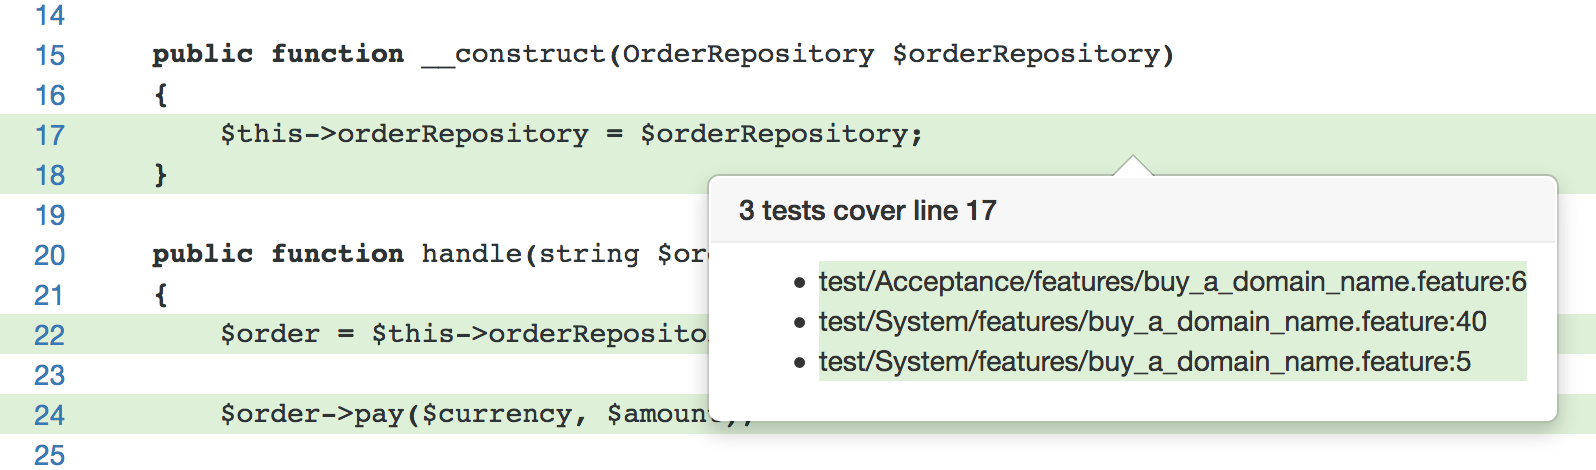 Merged code coverage report